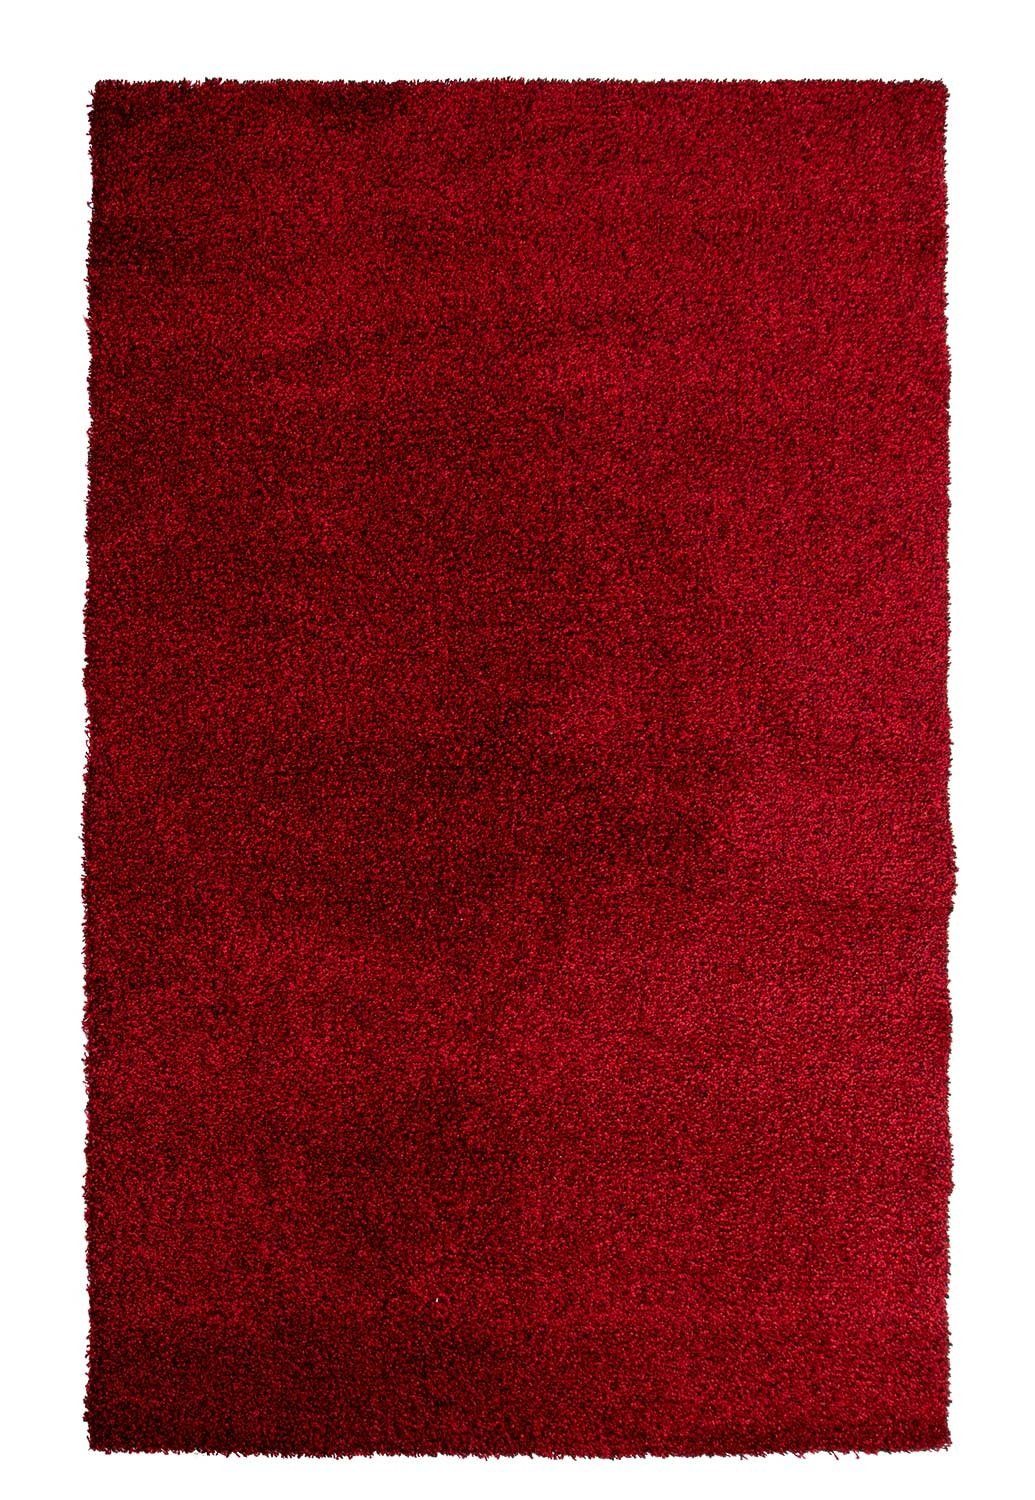 COSY, 22 Balta rechteckig, DELIGHT Teppich Rugs, Höhe: Rot, Polyester, x mm 230 160 cm,